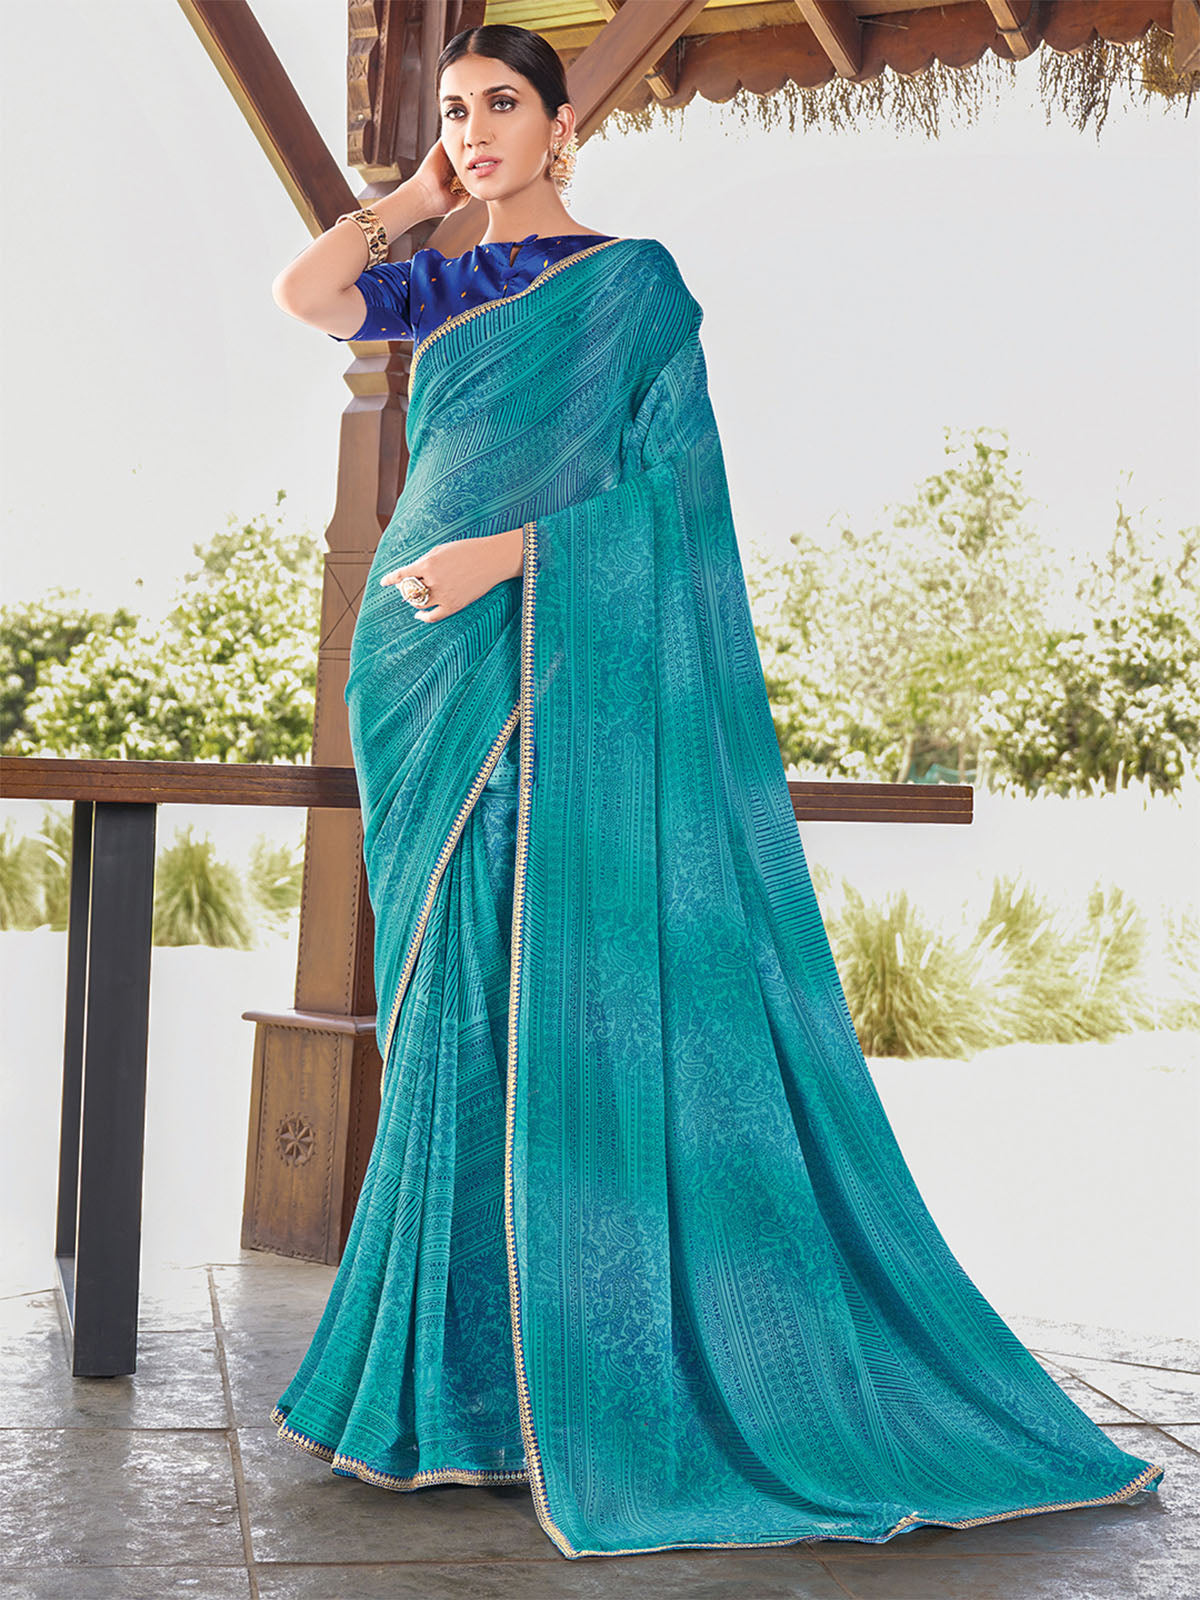 Odette Women Georgette Teal Blue Printed Saree With Unstitched Blouse